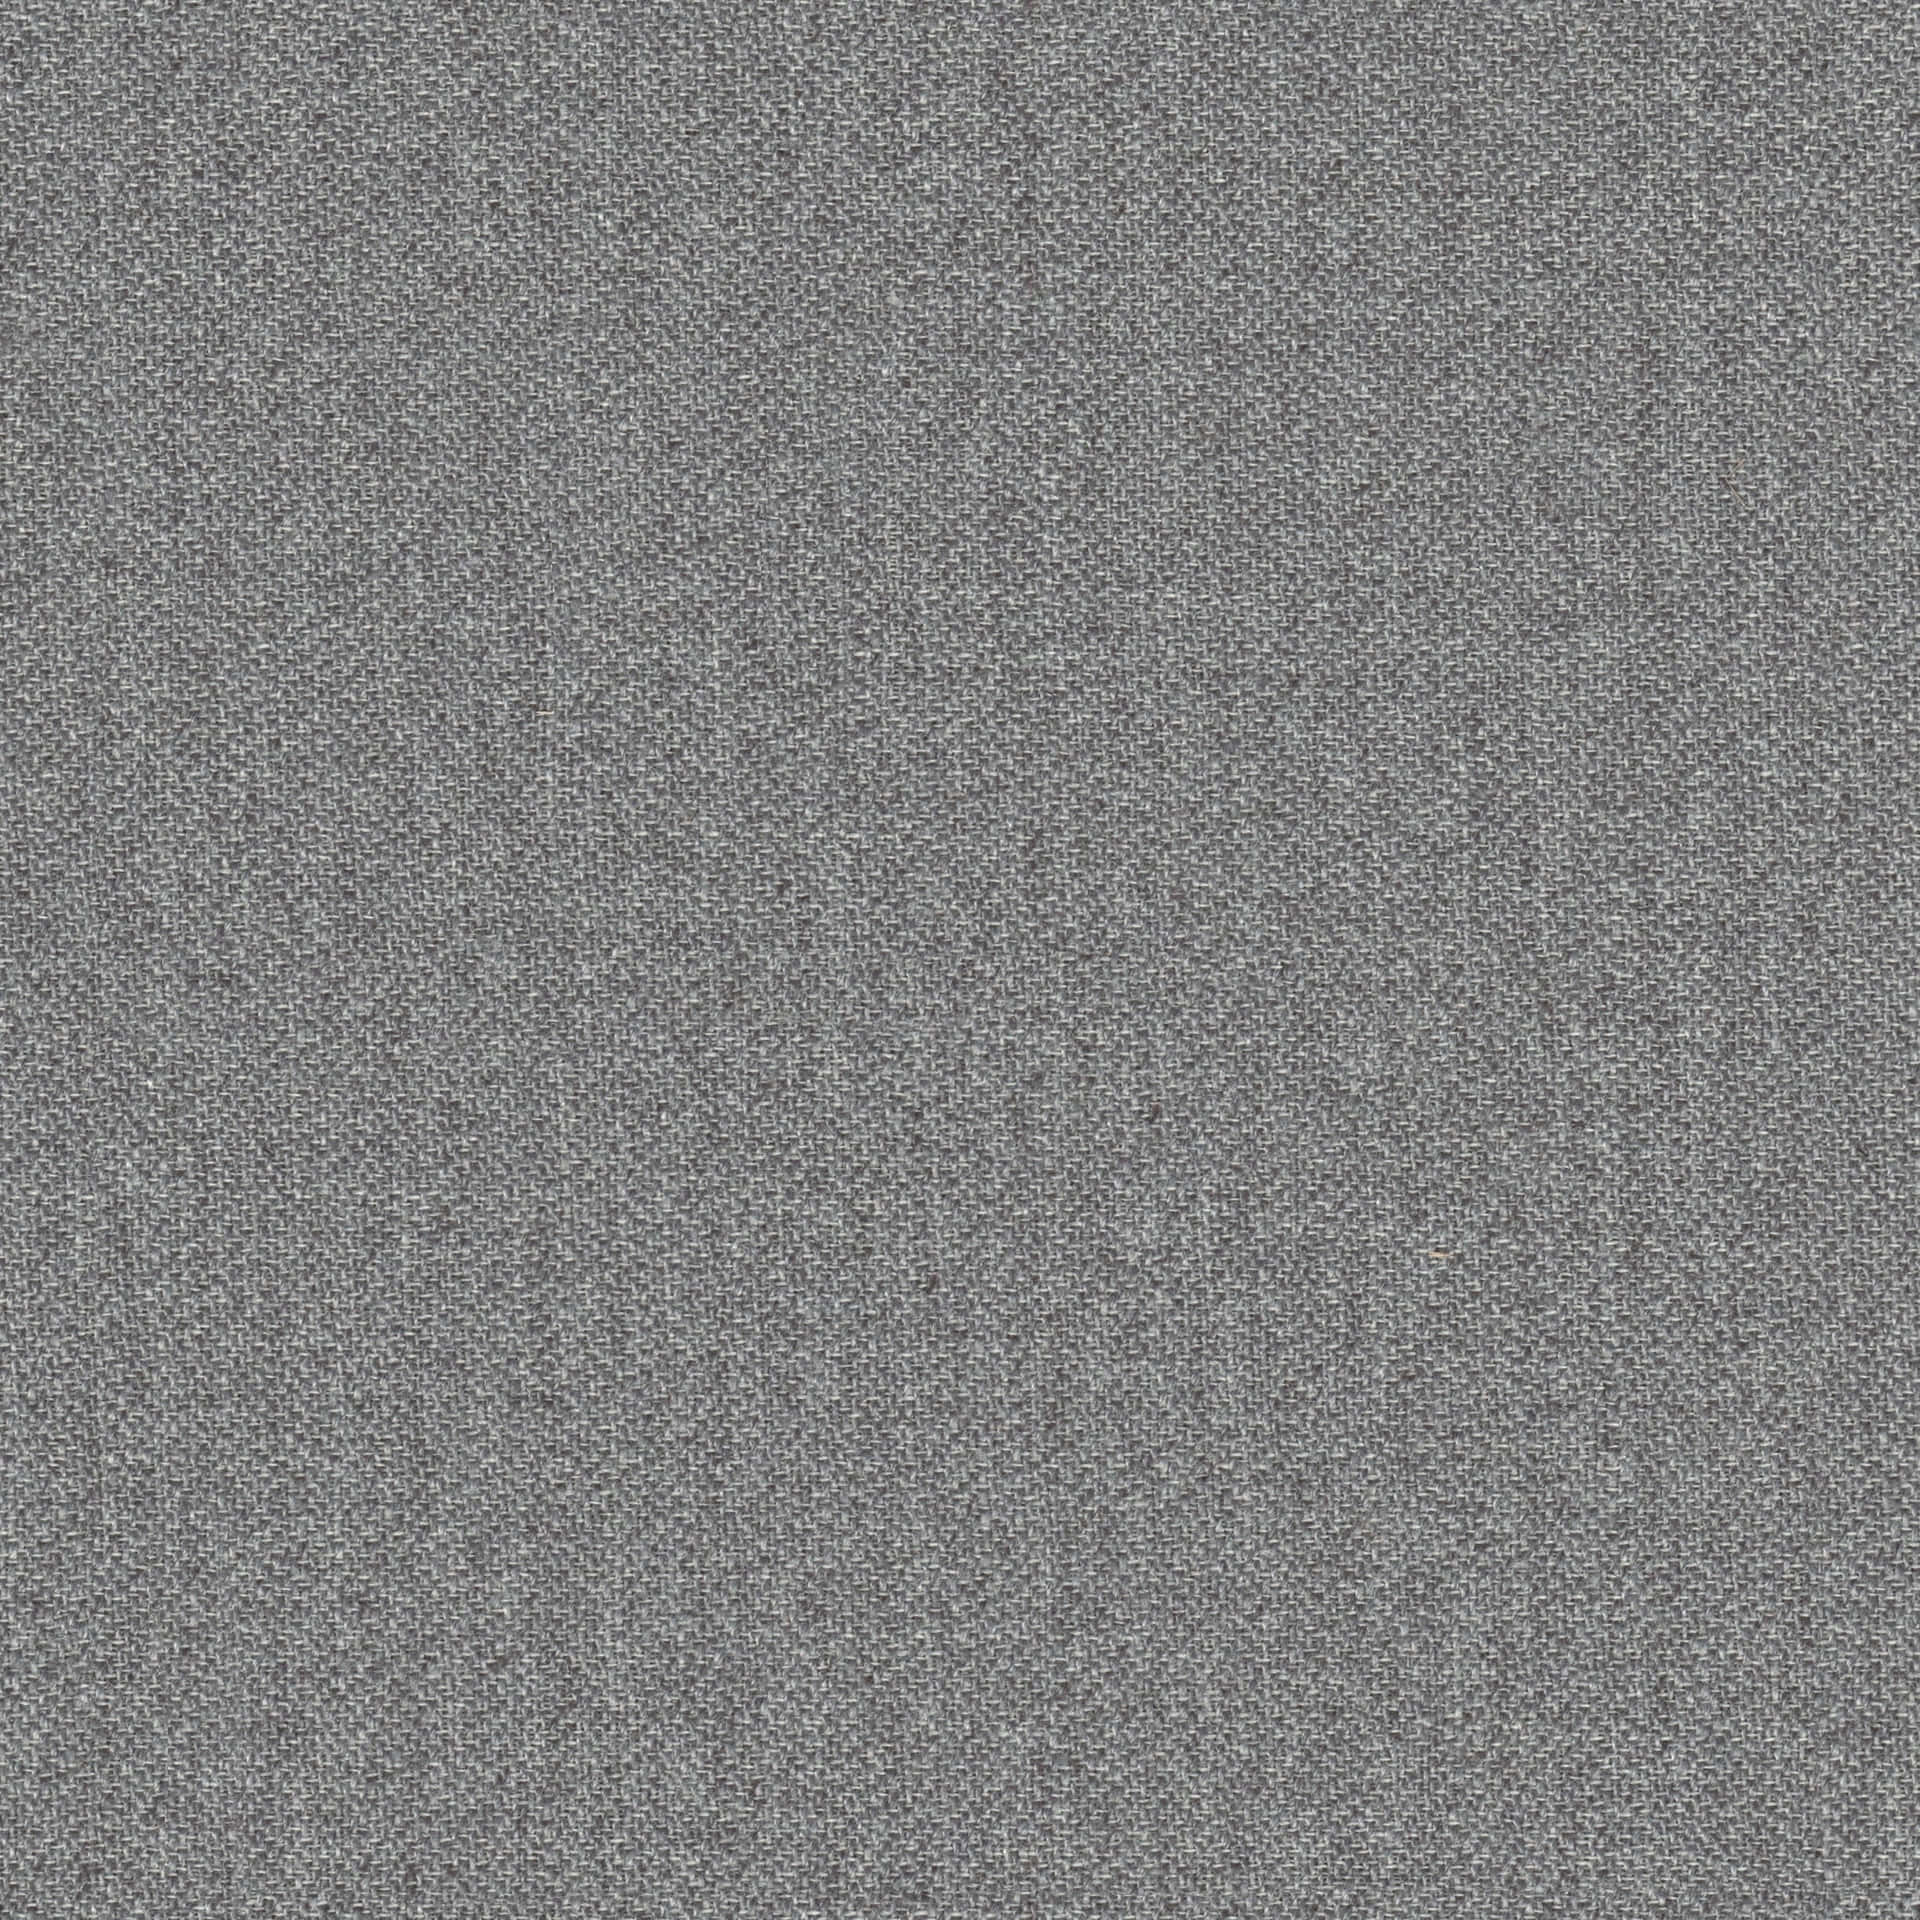 Fabric Texture Pictures Grey Seamless